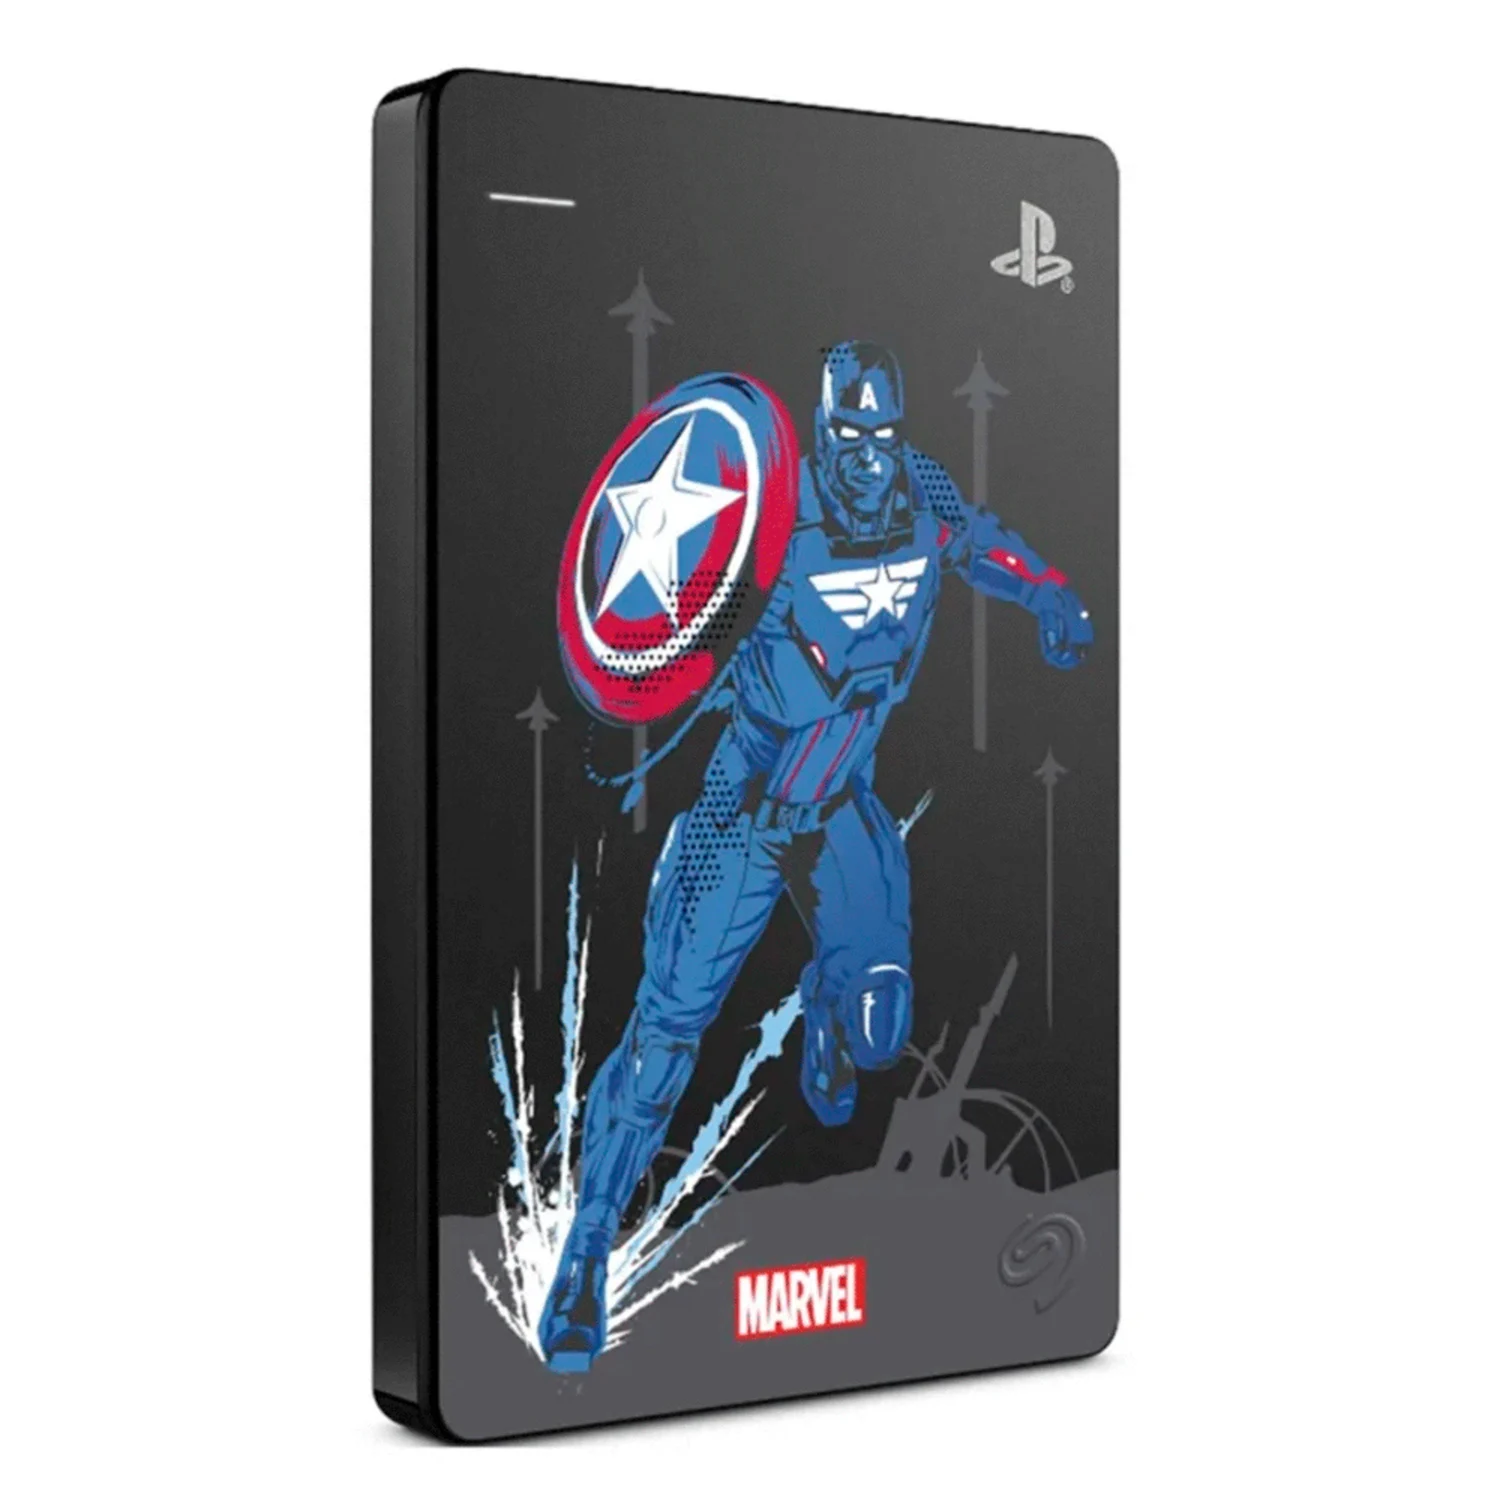 HD Externo Seagate 2TB 2.5 Game Drive Marvel Edition - (STGD2000107)